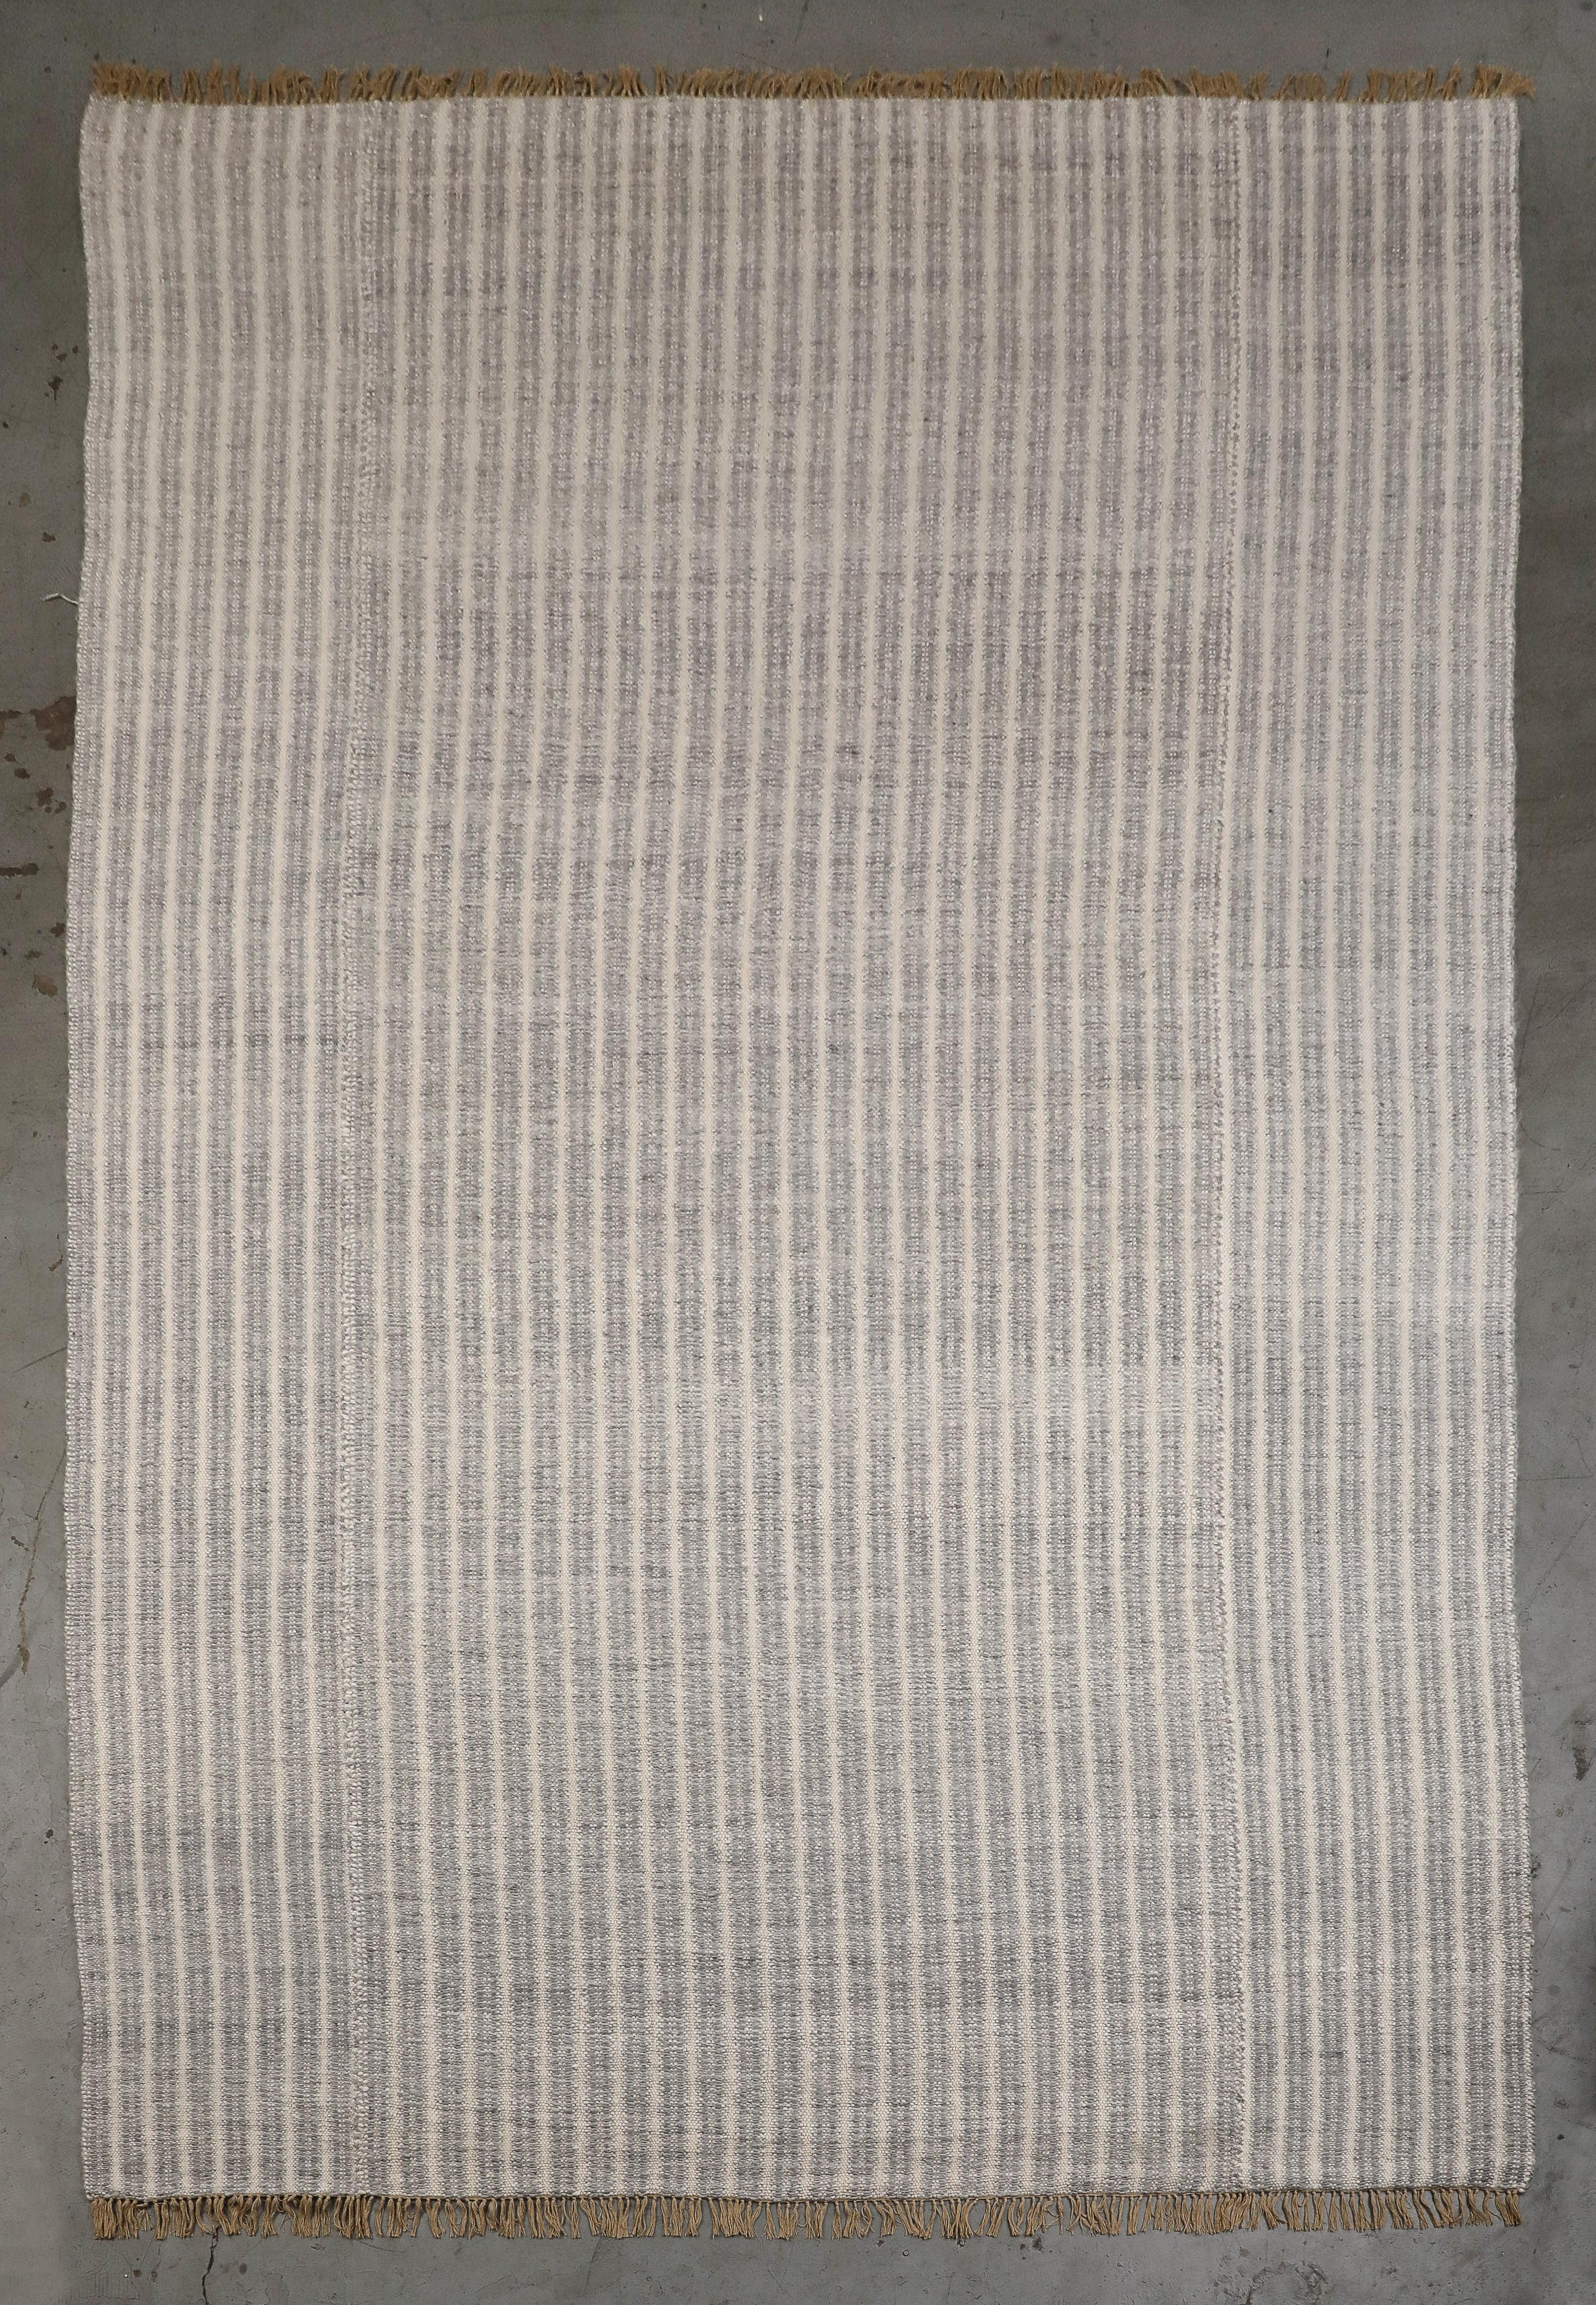 Ribbed mohair area rug custom made by Ennui Home in 2021. Handmade by artisans in Africa, this rug has never been used in a home. Blue-grey and cream stripes with a short tan hand-knotted fringe. 